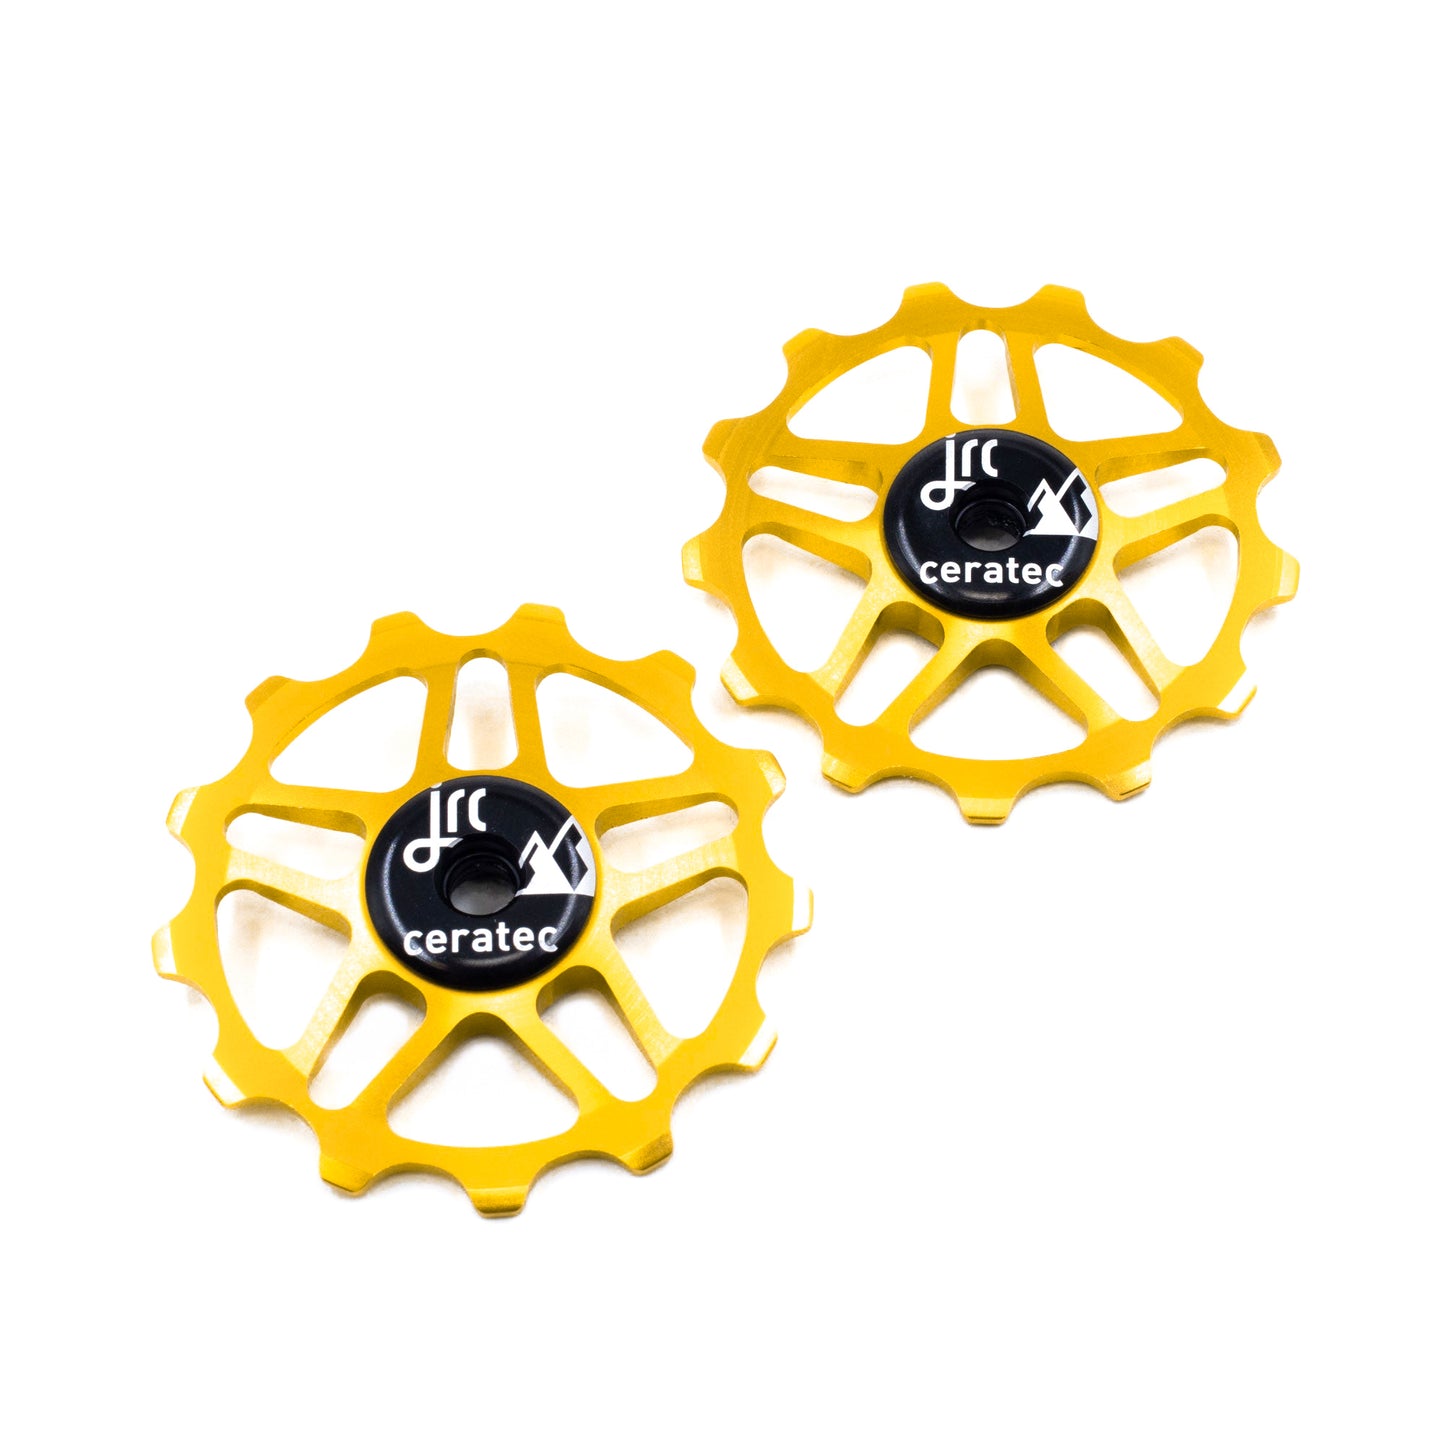 Gold, lightweight aluminium pulley wheel set for bicycle, compatible with 13 tooth Shimano 12 speed